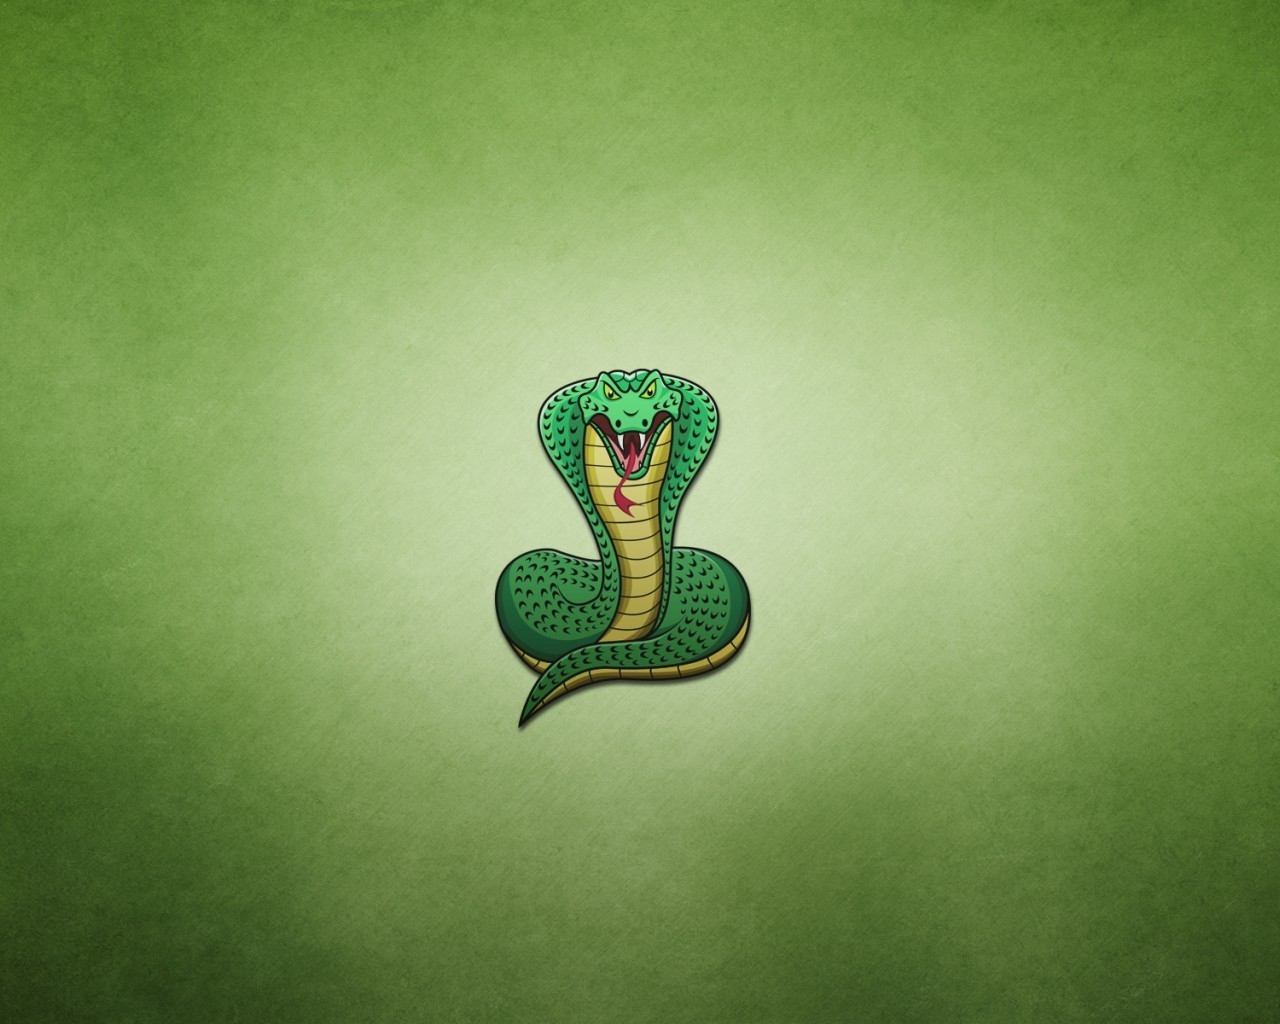 Cobra Snake Drawing for 1280 x 1024 resolution